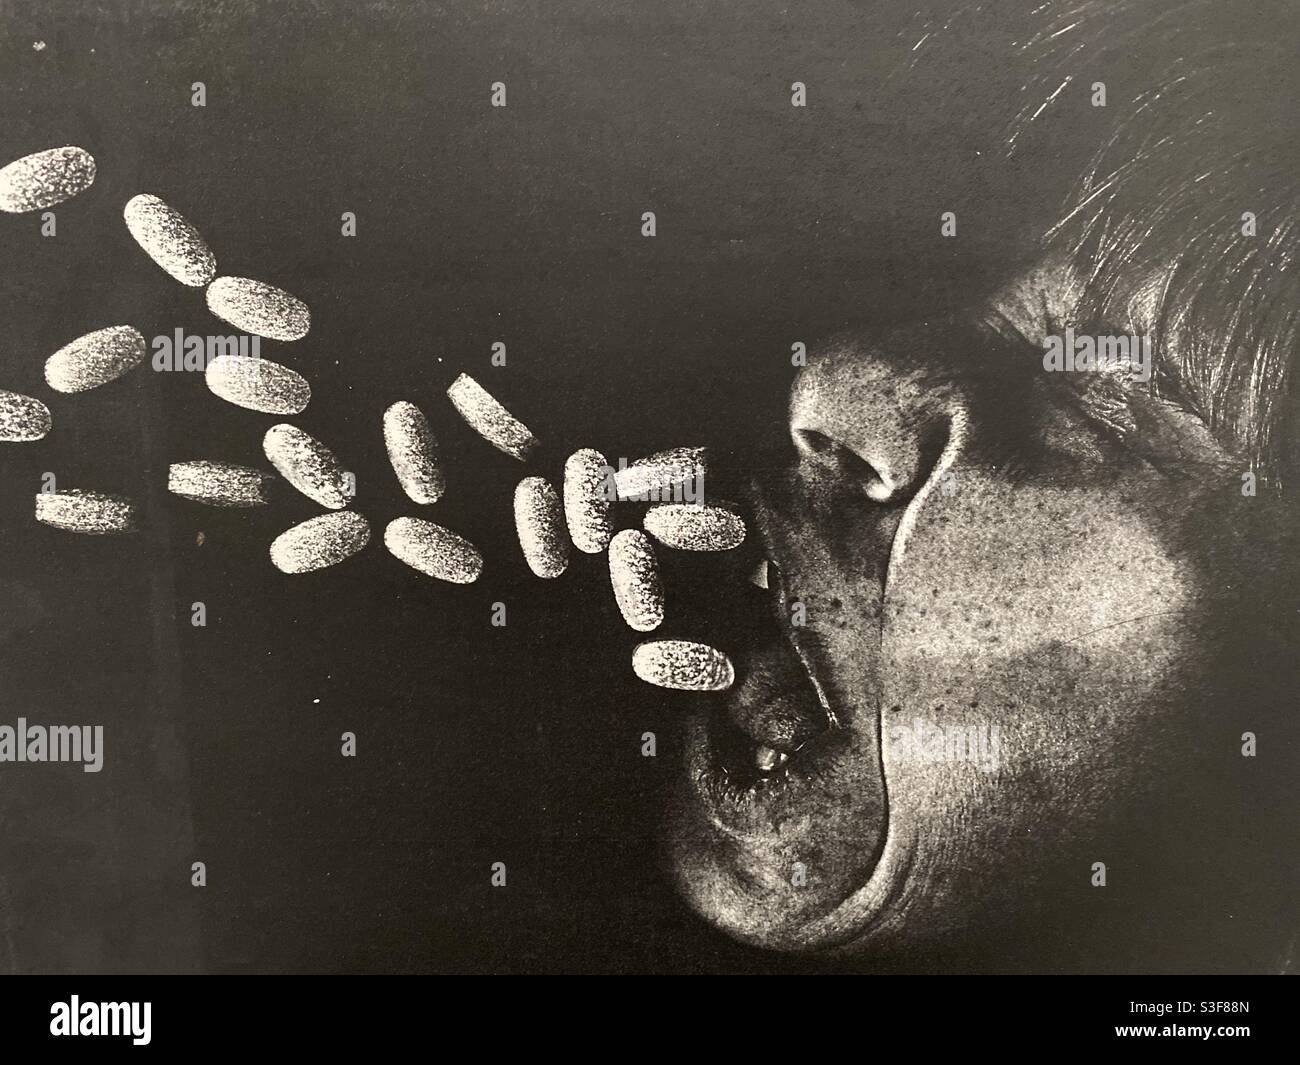 Vintage black and white abstract copy machine art piece: “Vomiting Vitamins” Stock Photo